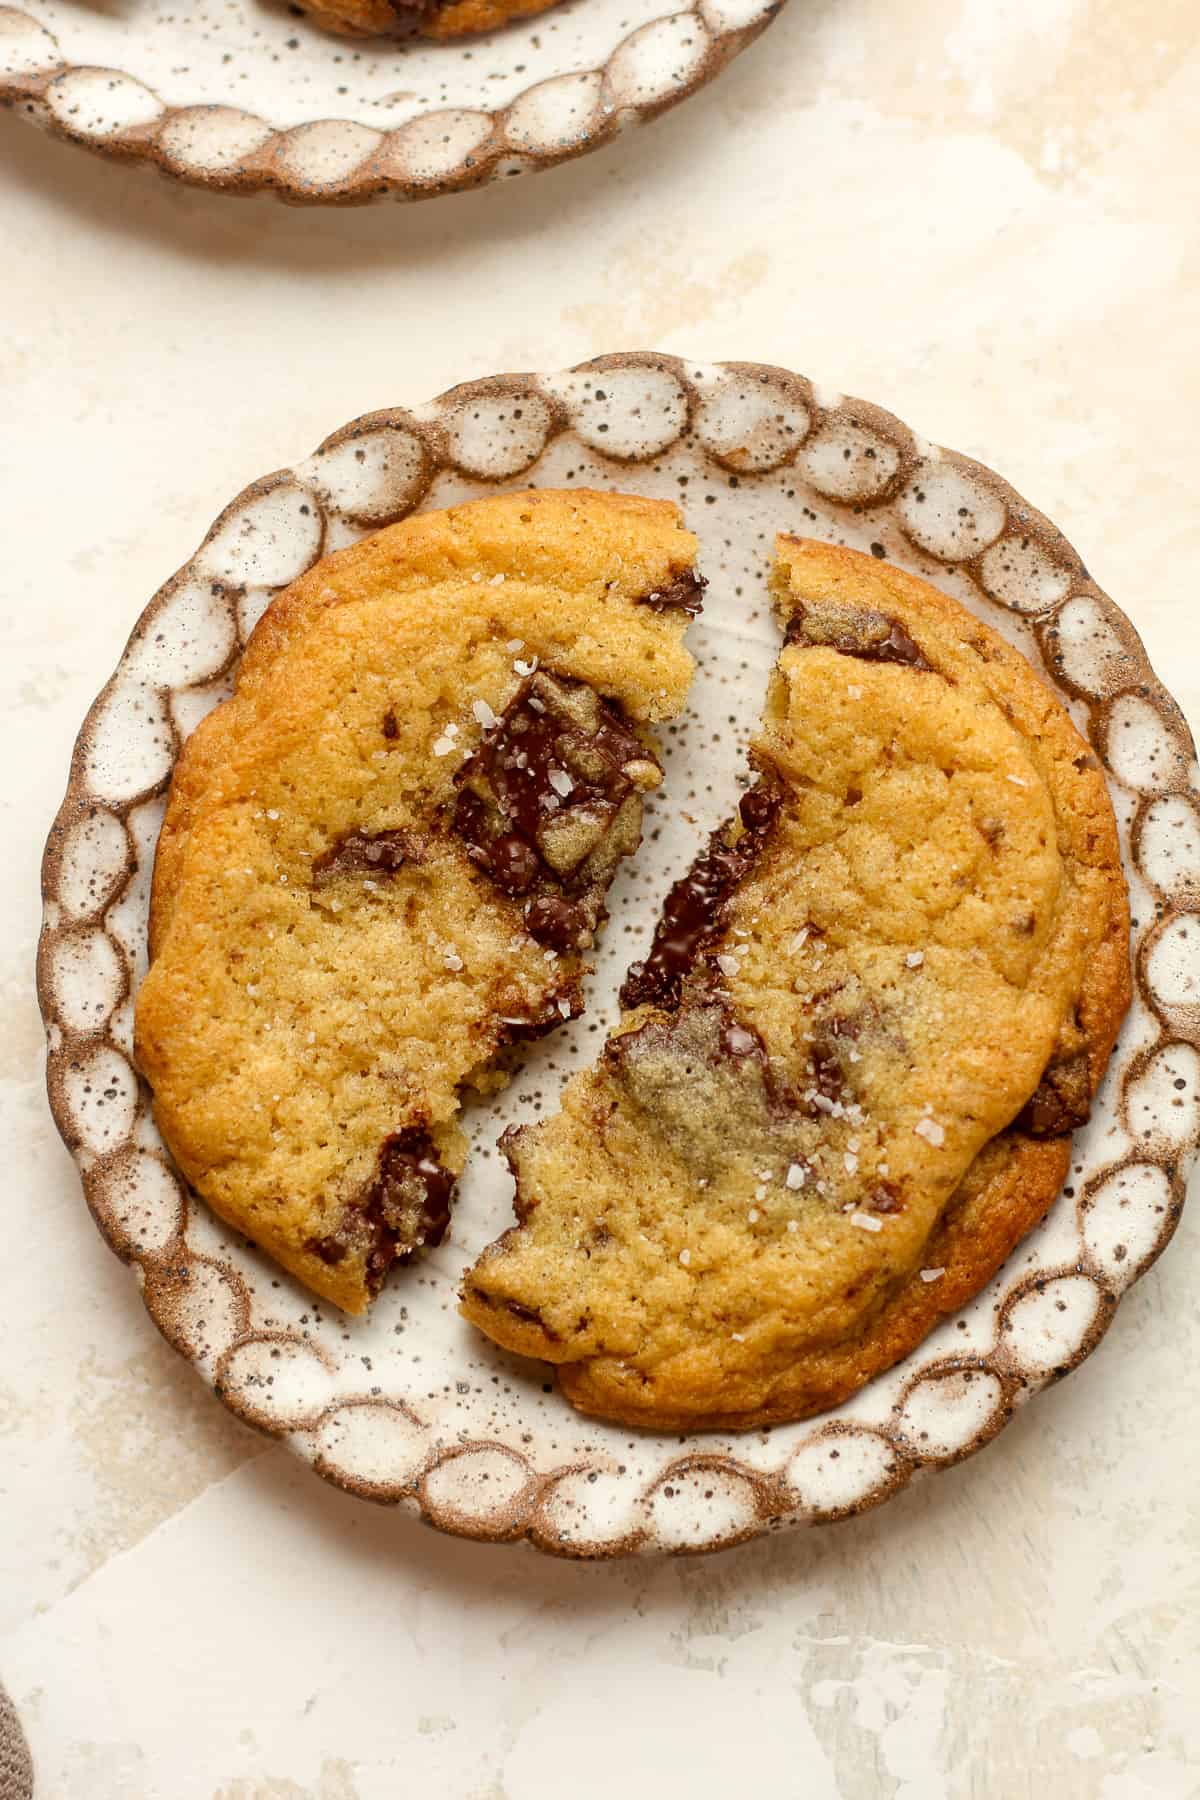 A small plate of a halved dark chocolate chunk cookie.